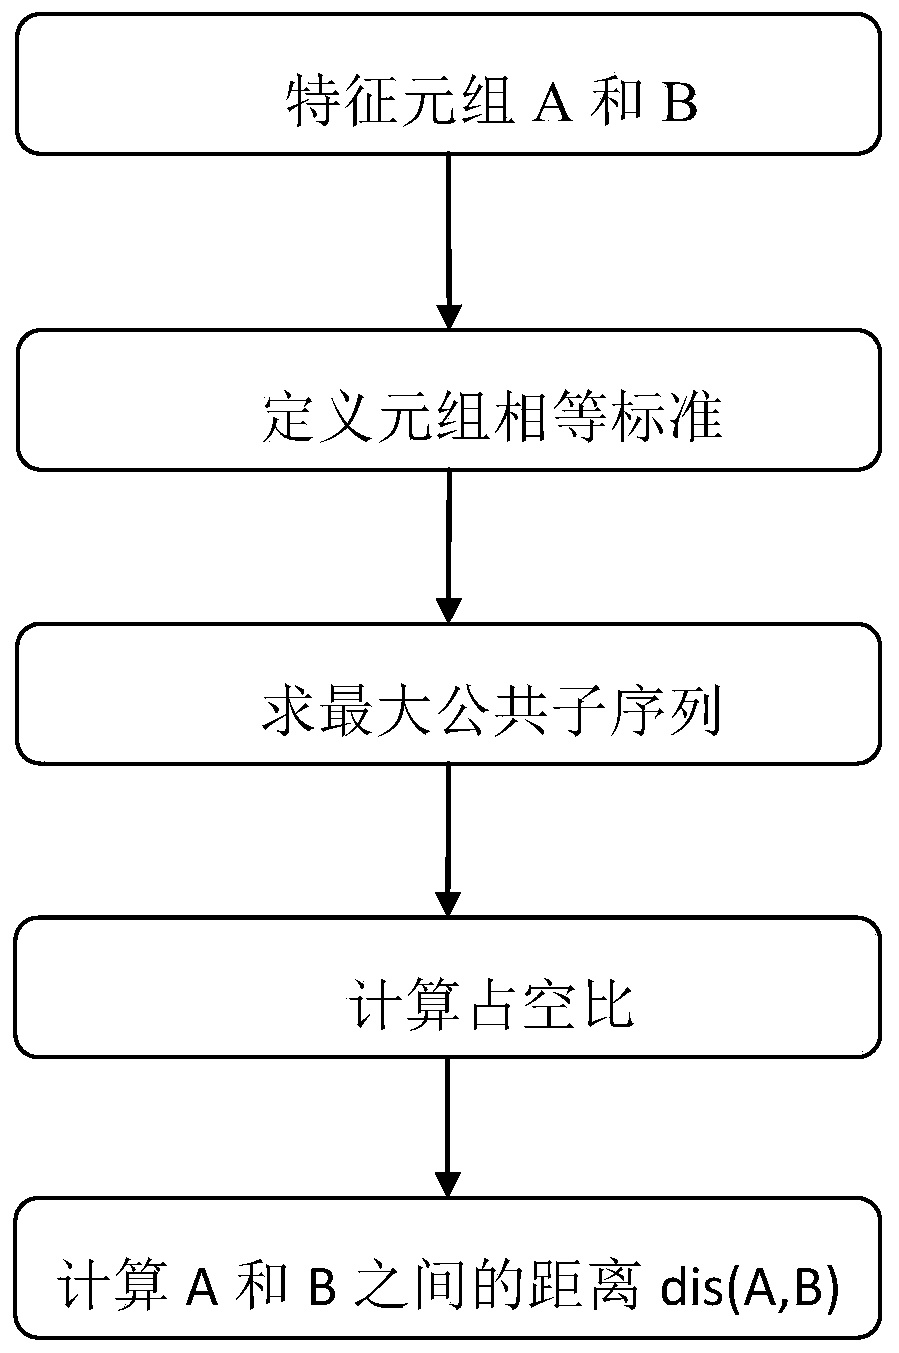 A power consumption mode extraction method and system